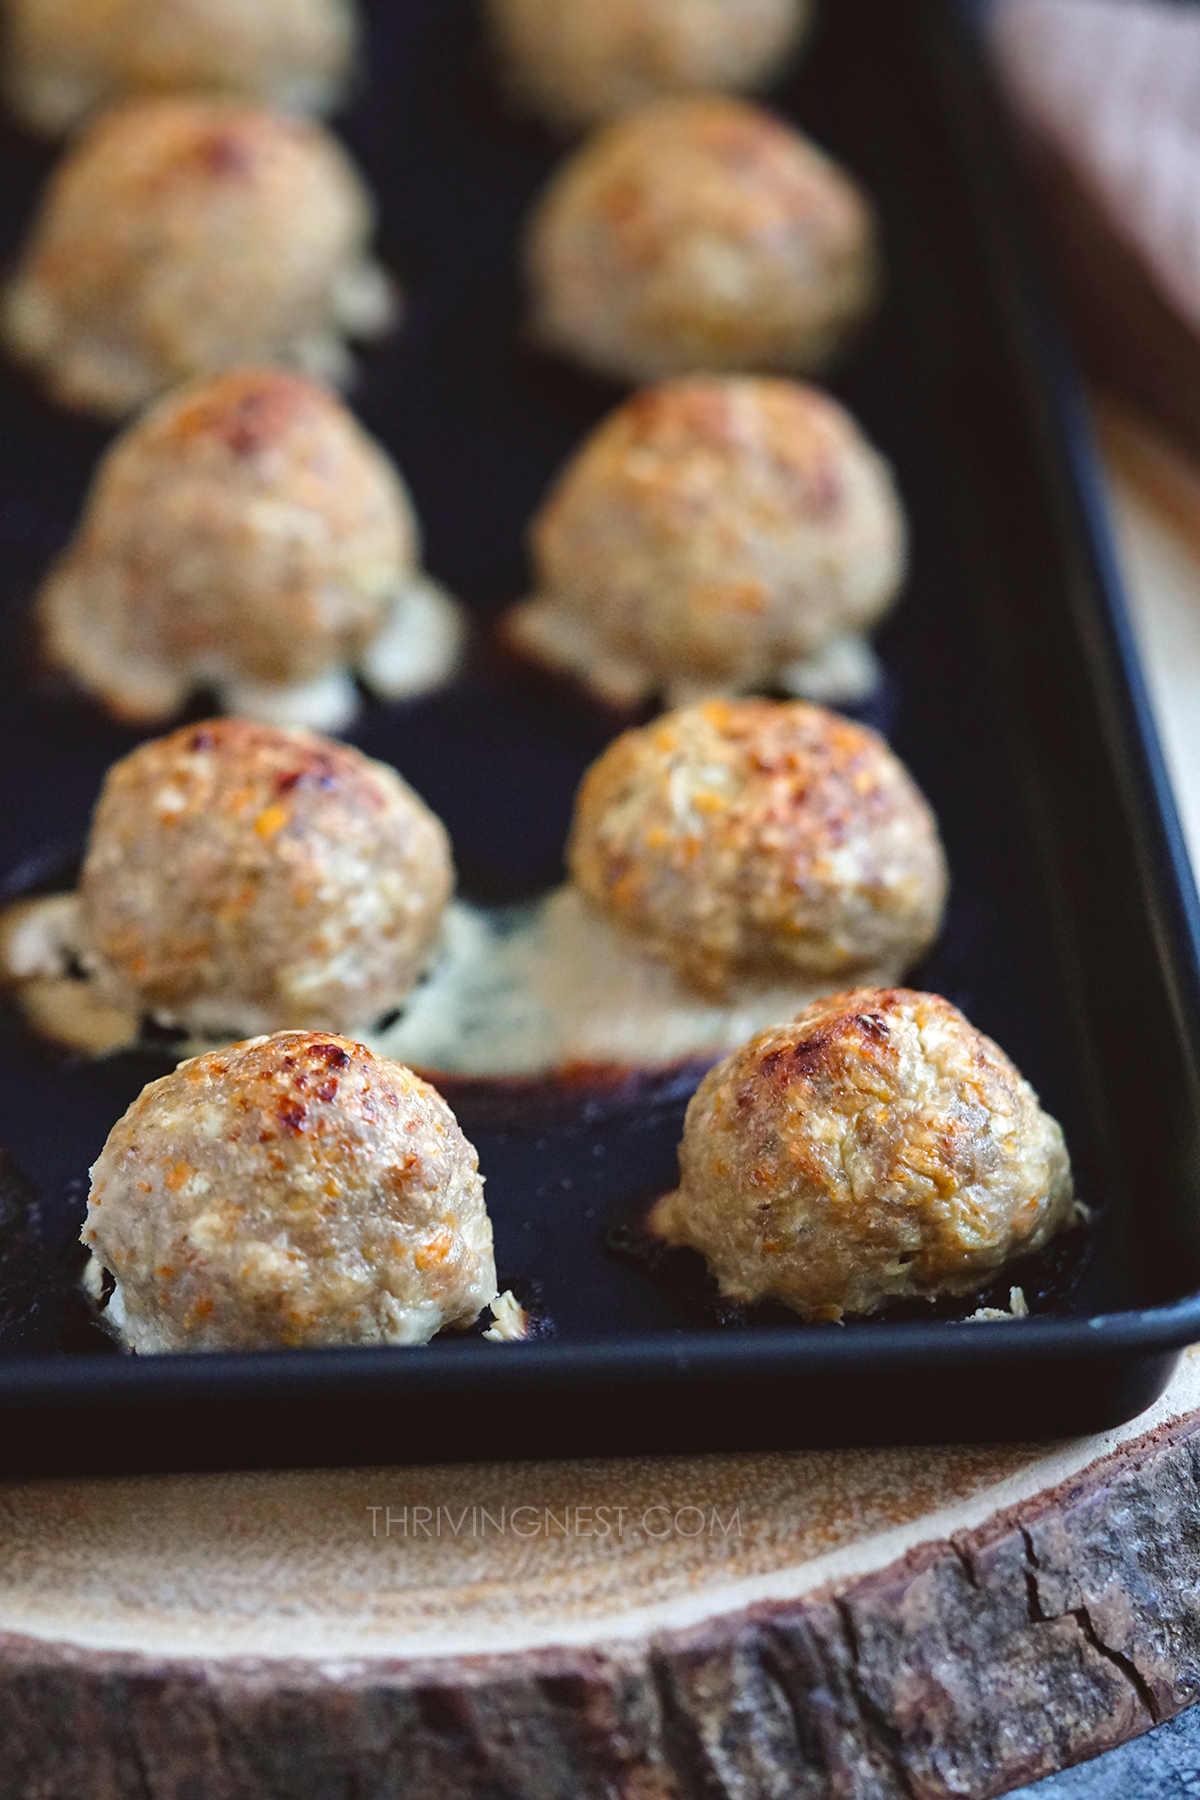 Baked turkey meatballs for baby, toddlers, kids, blw.